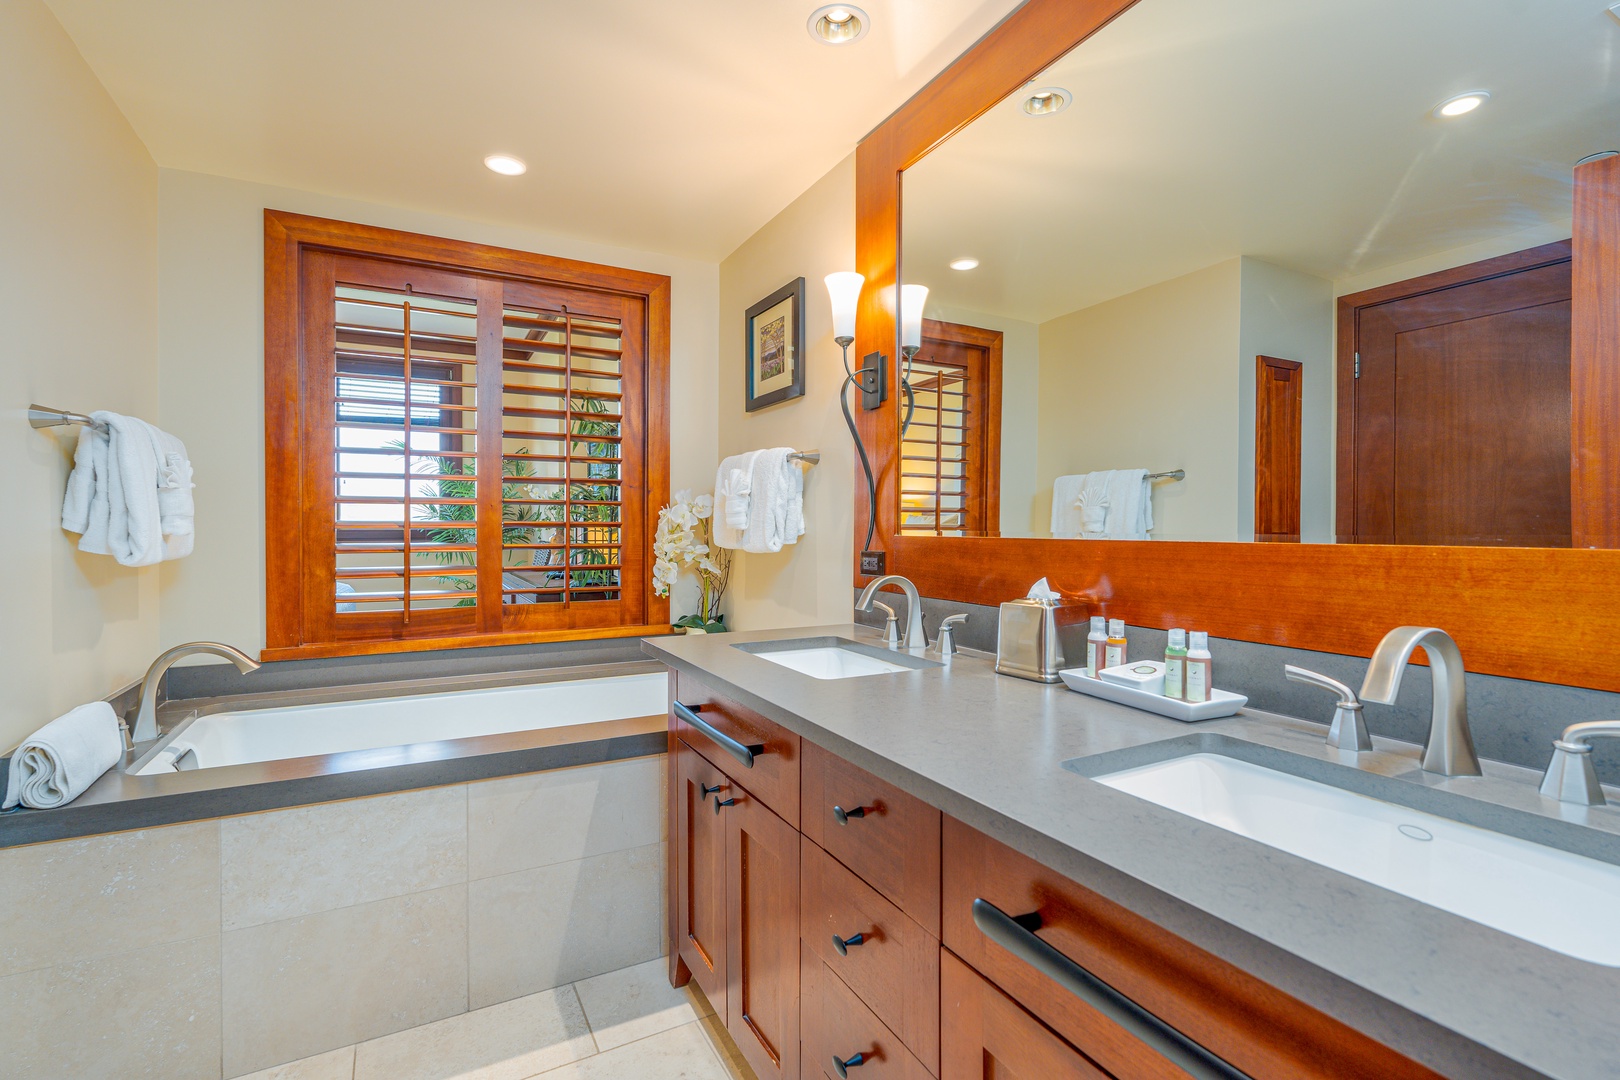 Kapolei Vacation Rentals, Ko Olina Beach Villas O904 - The primary guest bathroom with a double vanity and large soaking tub.